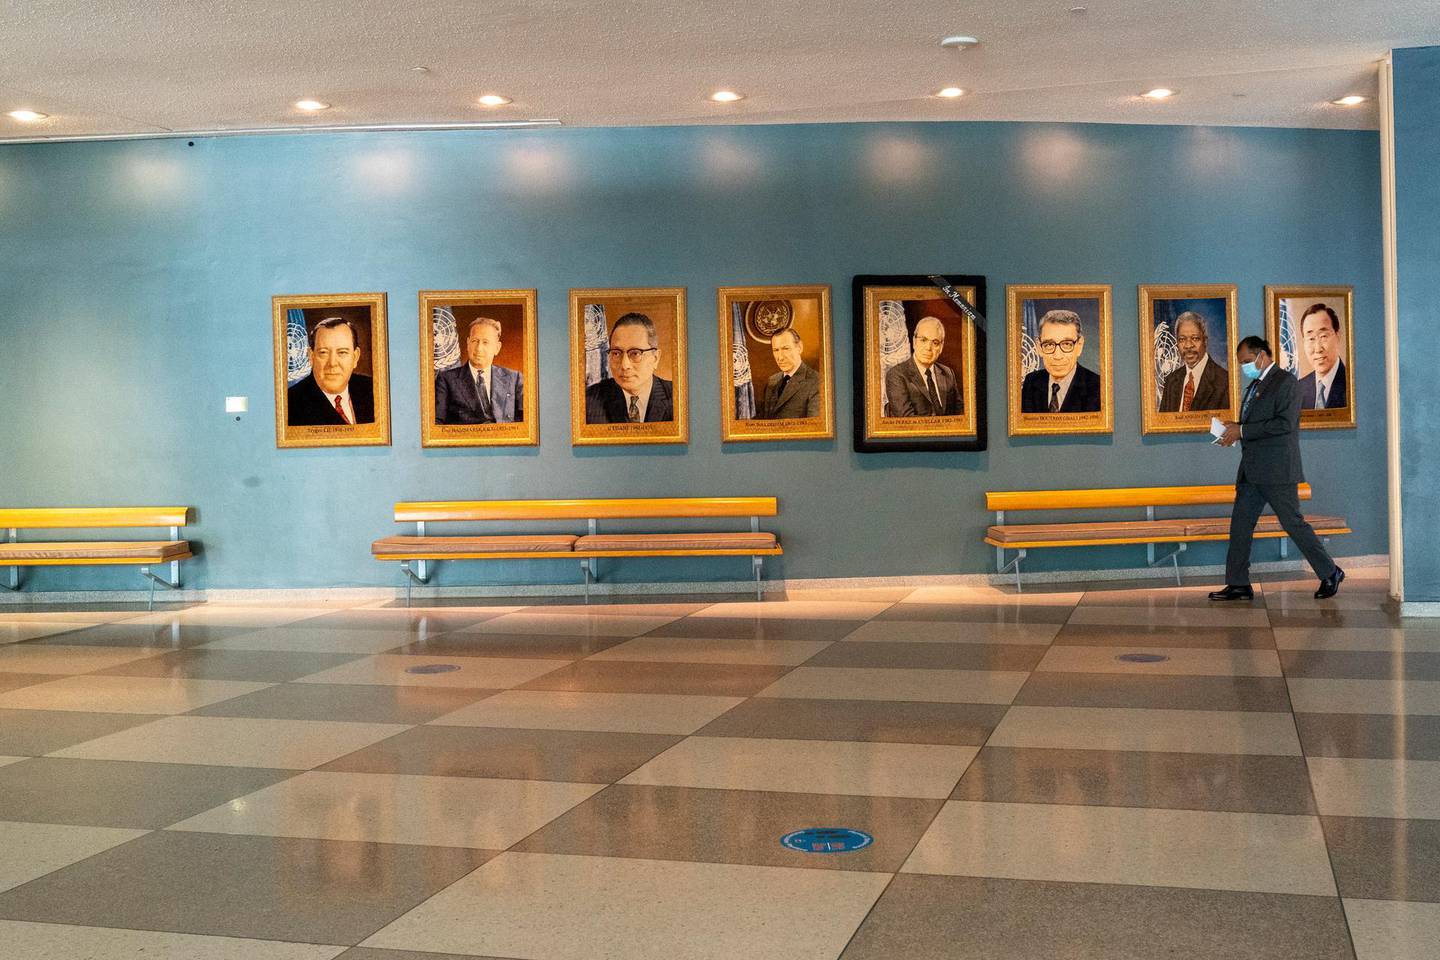 A man walk past portraits of former United Nations Secretary-Generals, Monday, Sept. 21, 2020 at United Nations headquarters. In 2020, which marks the 75th anniversary of the United Nations, the annual high-level meeting of world leaders around the U.N. General Assembly will be very different from years past because of the coronavirus pandemic. Leaders will not be traveling to the United Nations in New York for their addresses, which will be prerecorded. Most events related to the gathering will be held virtually. No access to world leaders on the U.N. grounds will be possible, therefore, and access to most anything will be extremely curtailed. (AP Photo/Mary Altaffer)